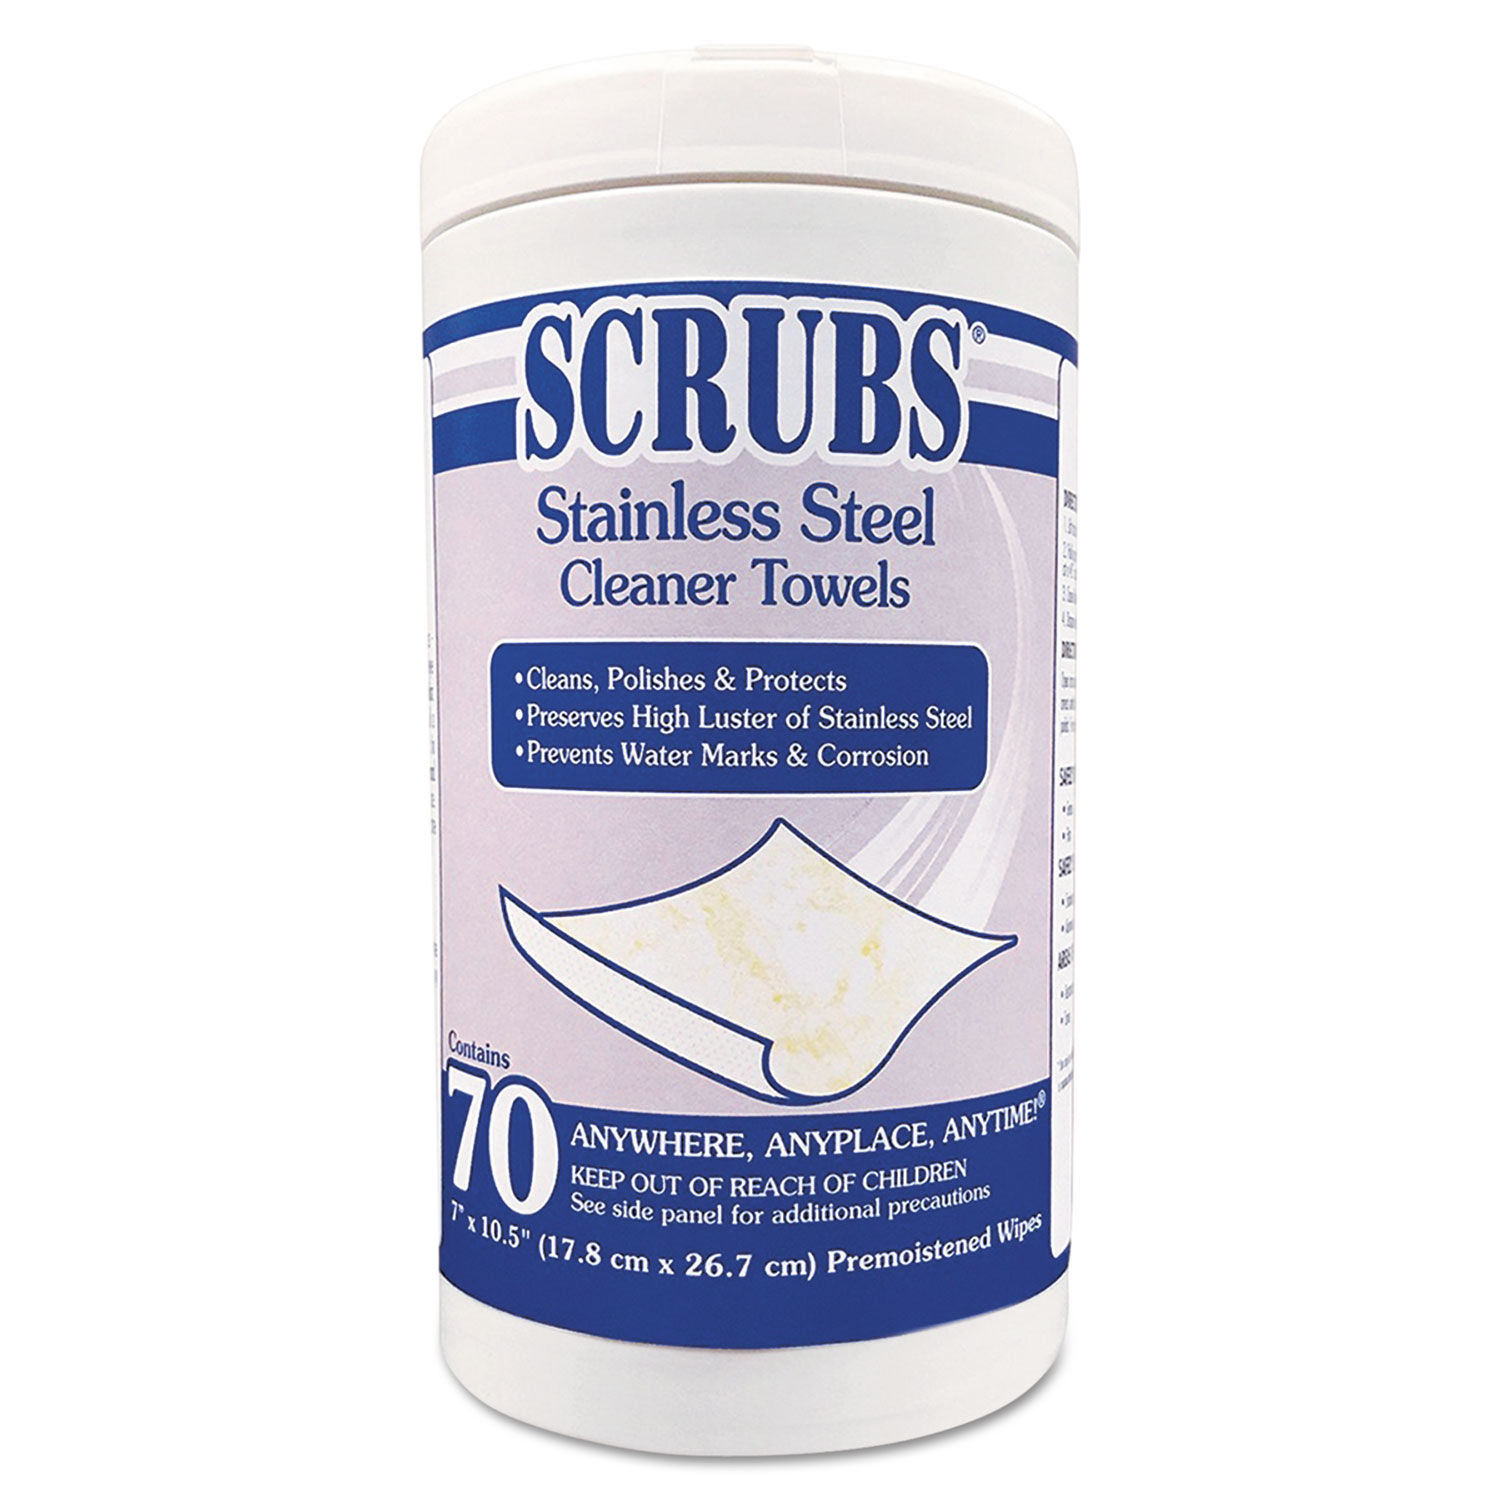 Scrubs Stainless Steel Cleaner Towels, 30-canister, 6 Canisters-carton